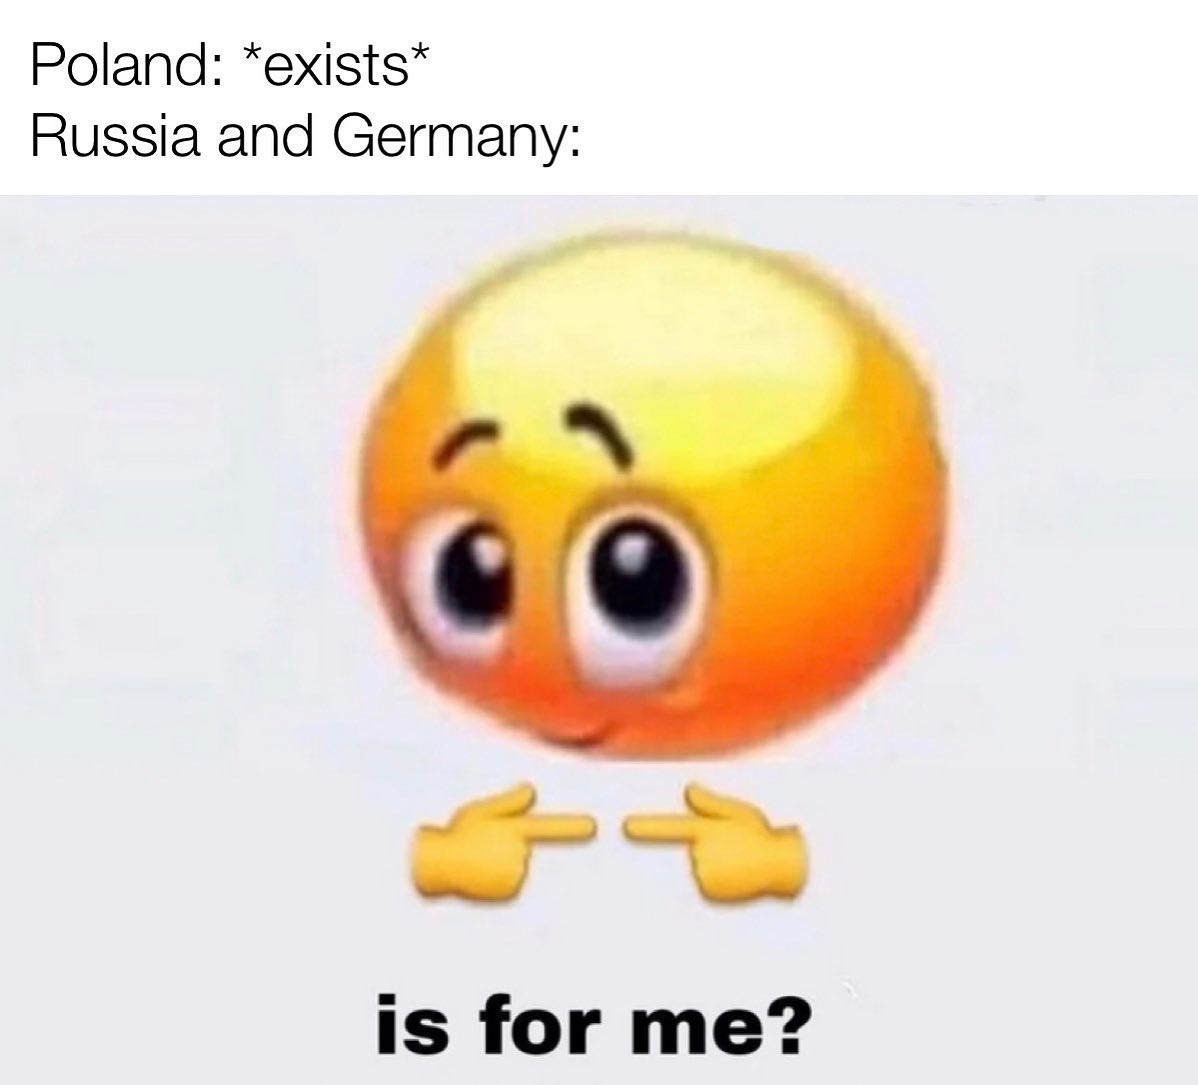 is for me? emoji meme - recipe for men - Poland exists Russia and Germany pa is for me?